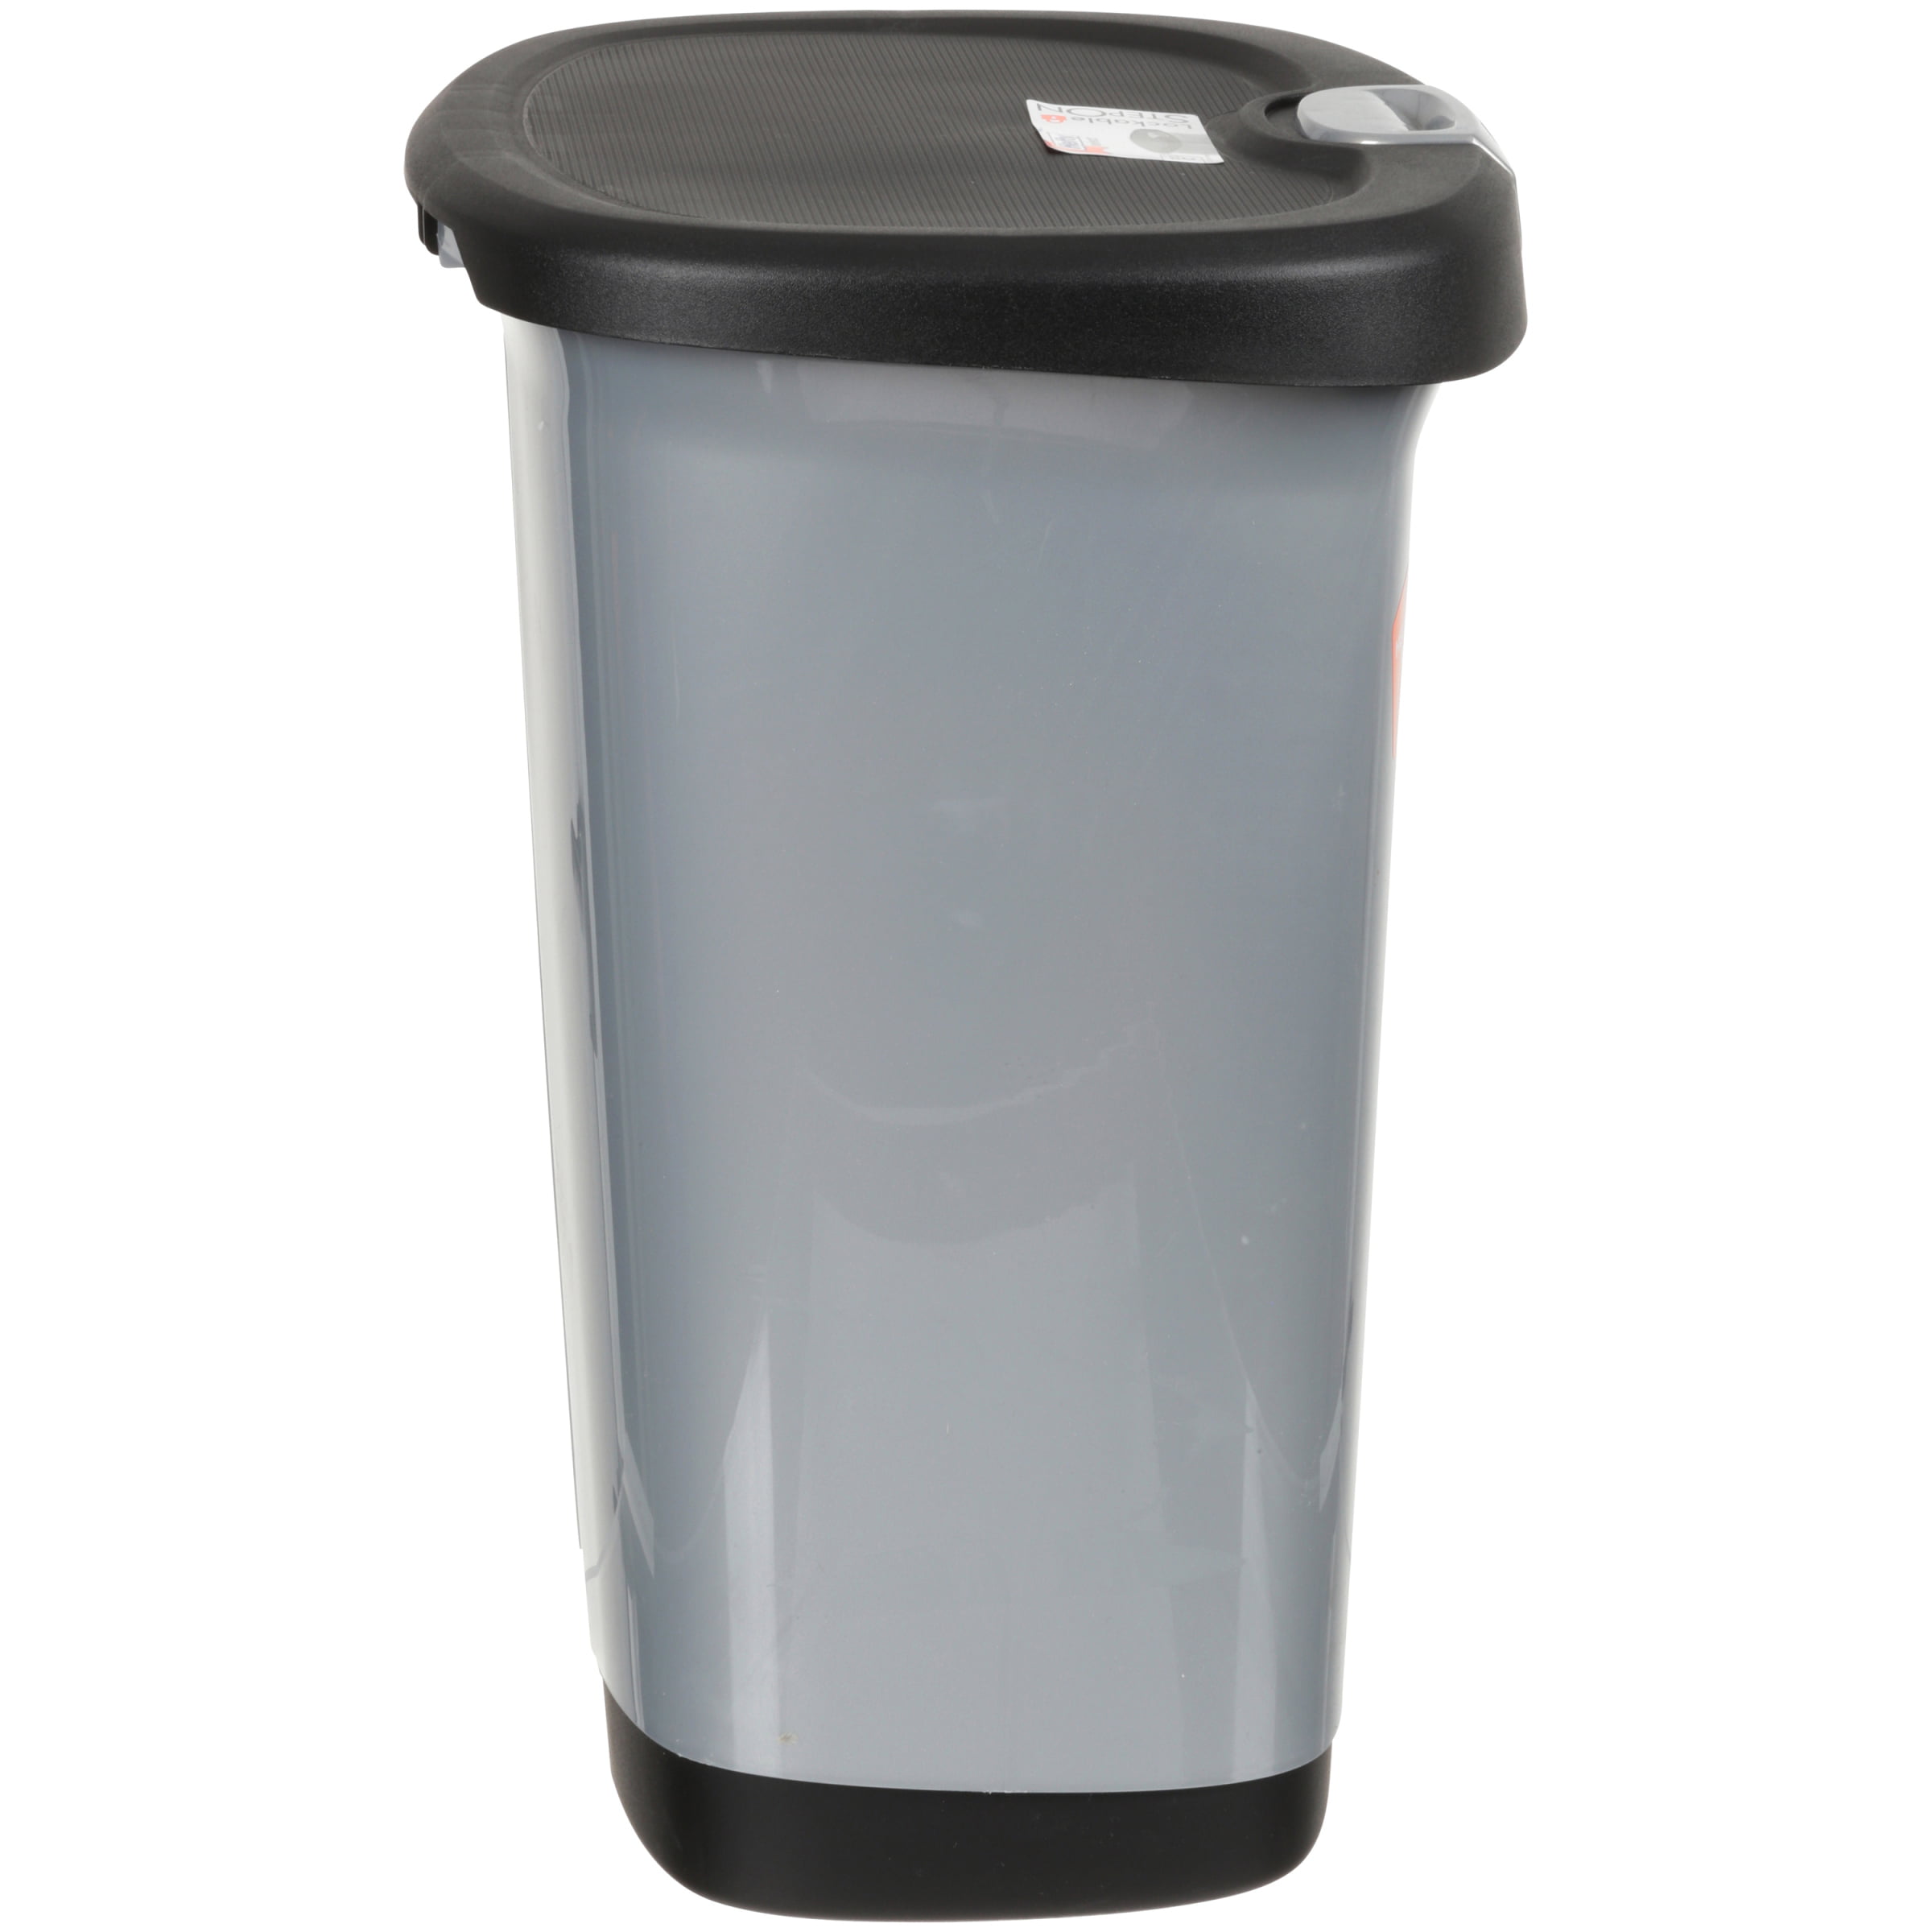 14.85 x 11.83 x 18.53 Inches 1 Hefty 7-Gallon Textured Step On Waste Can with Lid Lock and Bottom Cap 